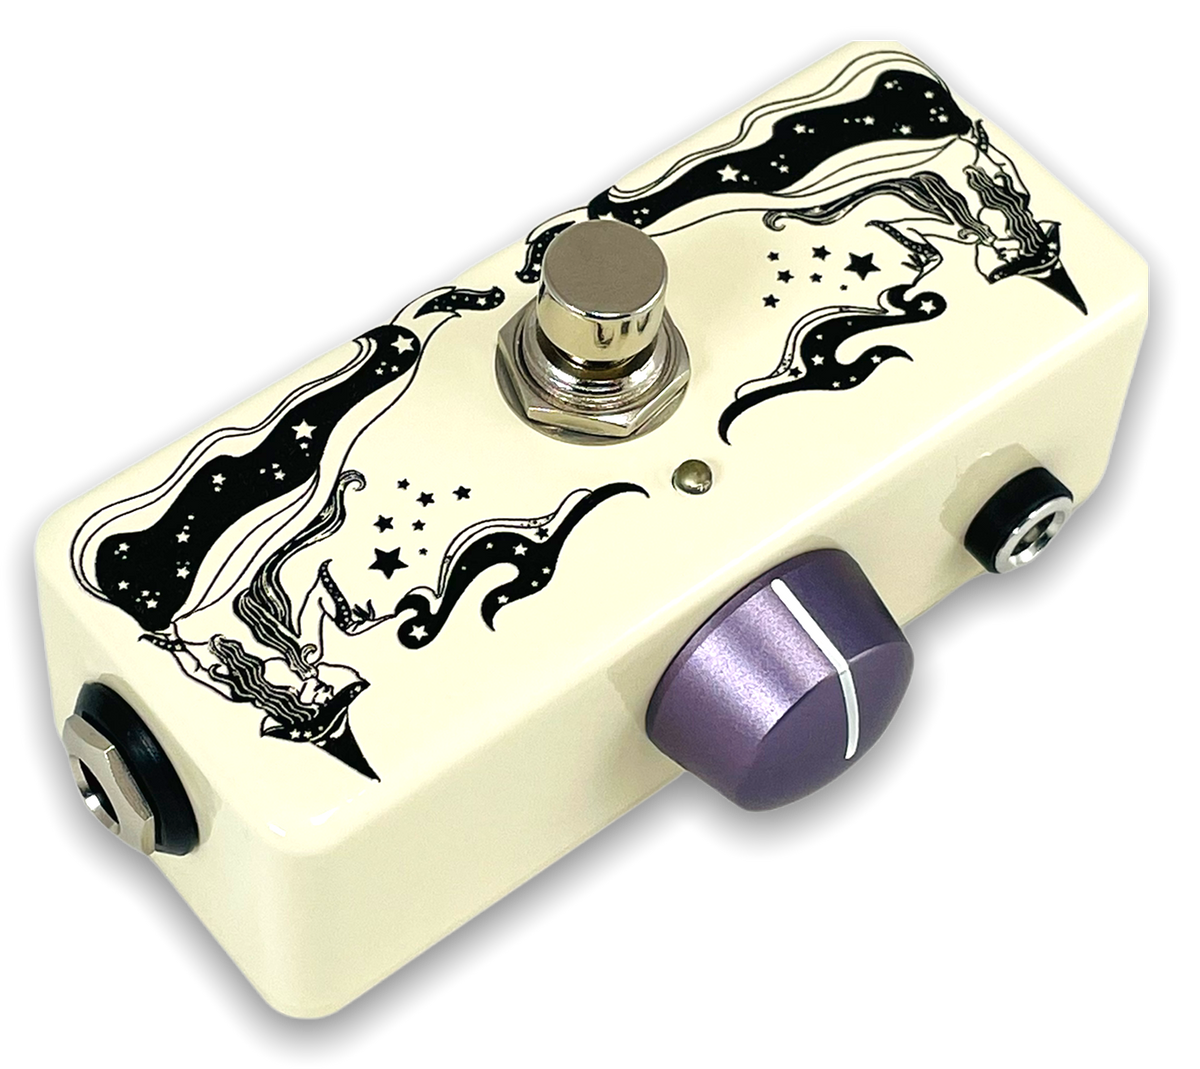 XENIA Overdrive Engine - Perfectly Imperfect sale